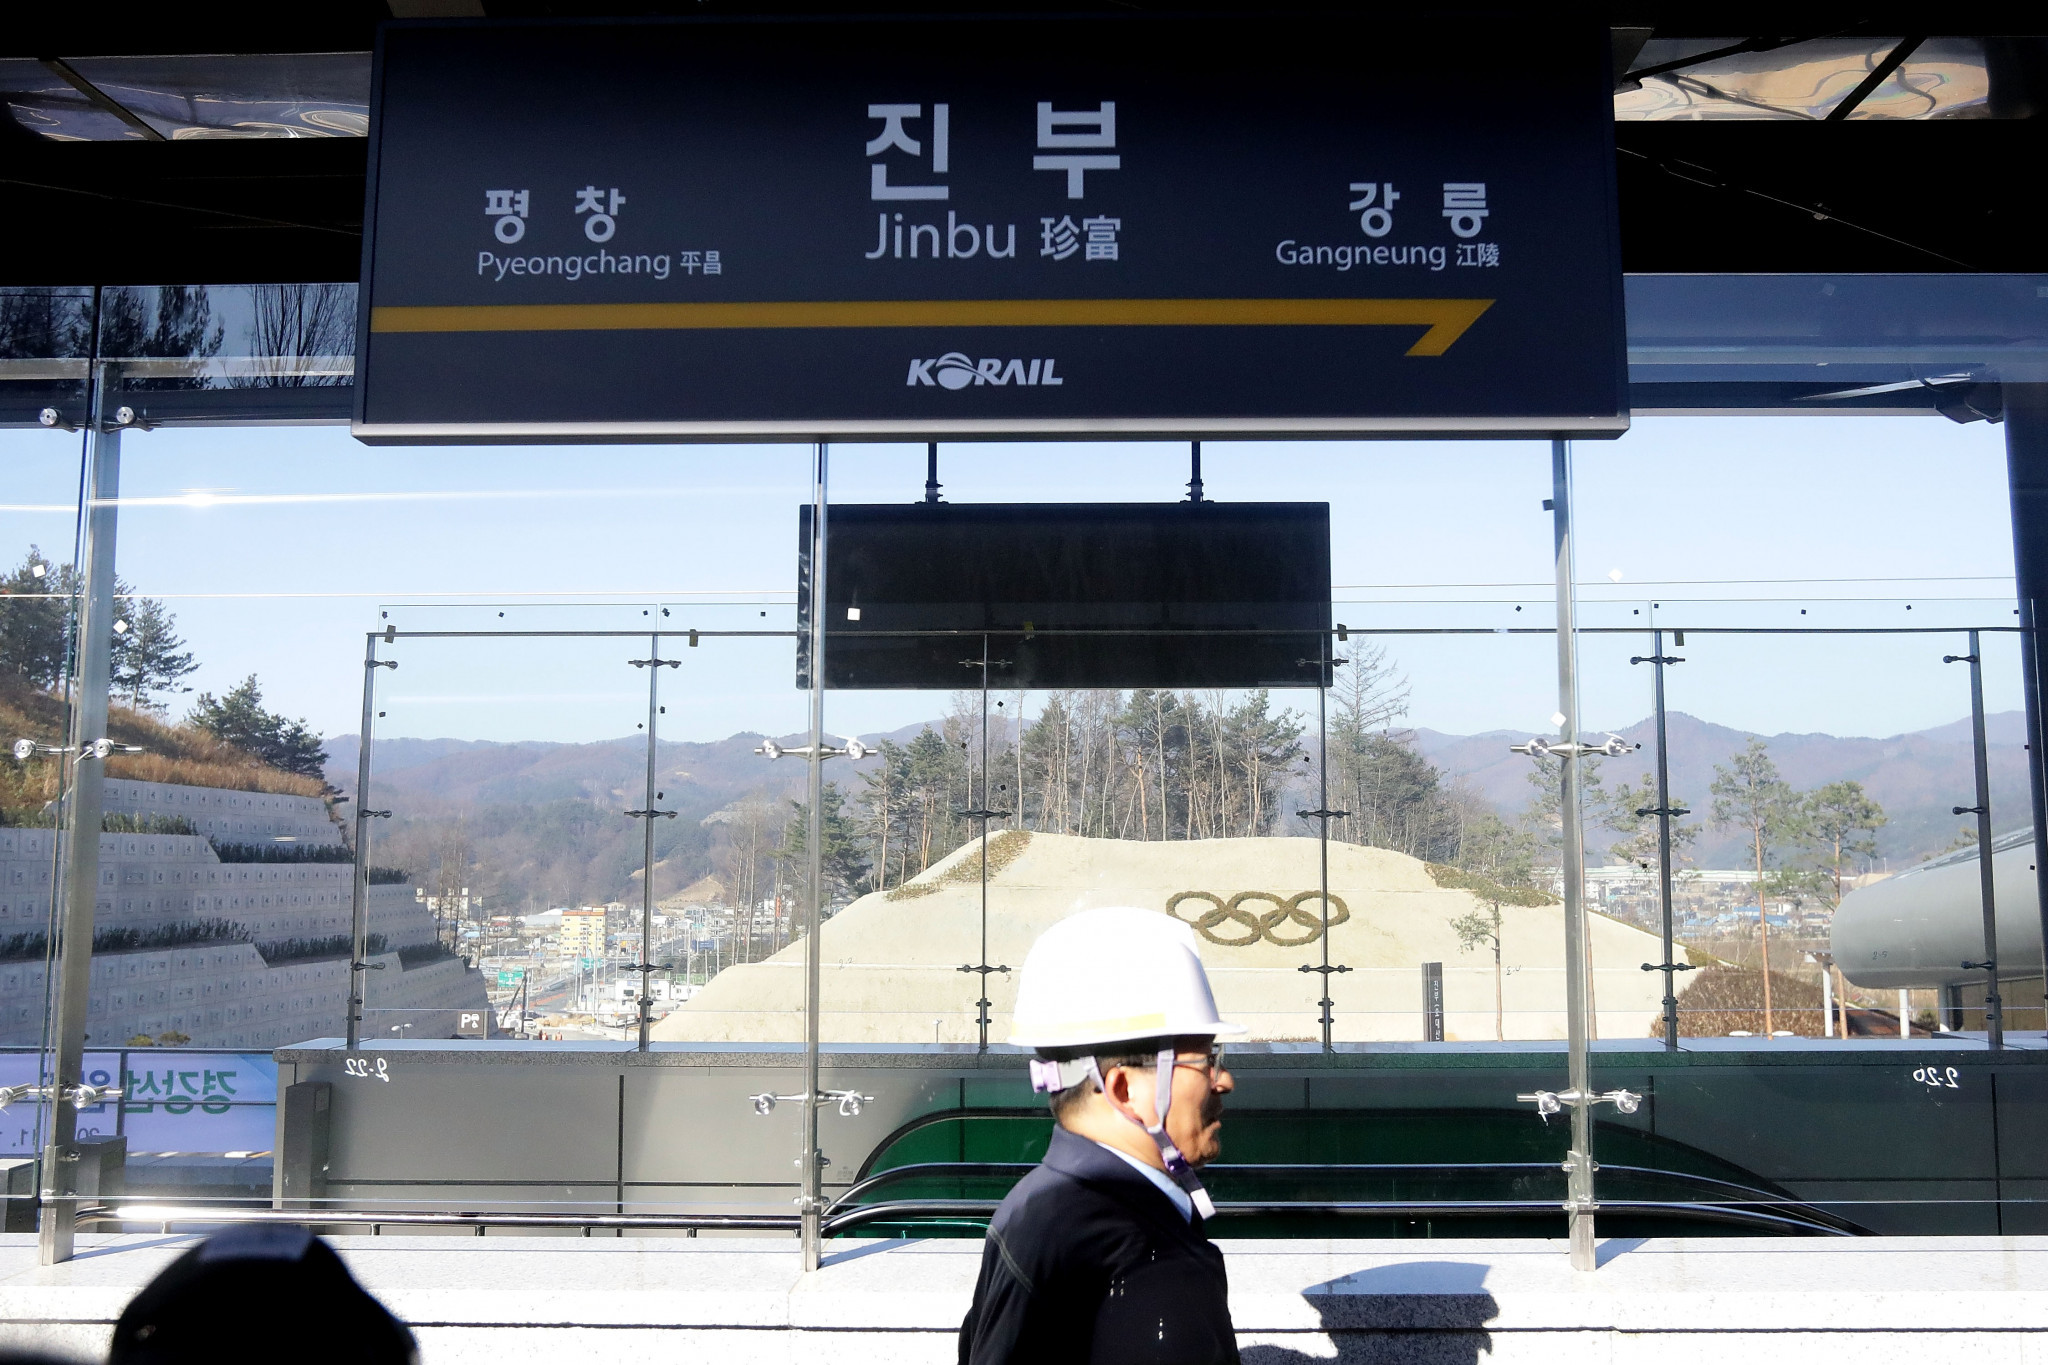 Up to 51 trains a day will transport more than 20,000 passengers from South Korean capital Seoul to the site of Pyeongchang 2018 during the Olympic Games ©Pyeongchang 2018